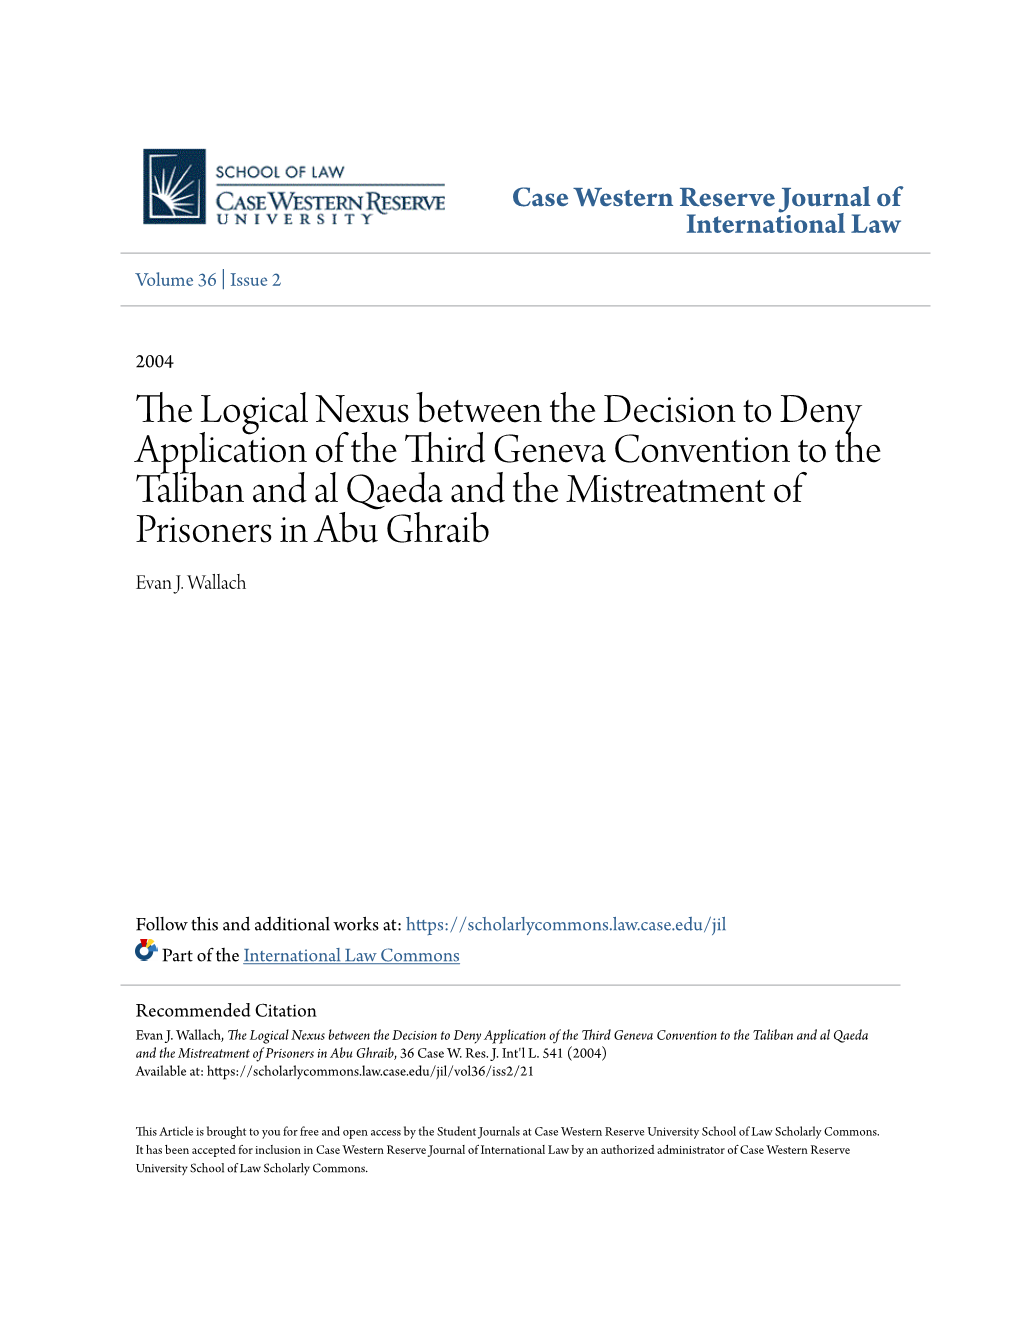 The Logical Nexus Between the Decision to Deny Application of The